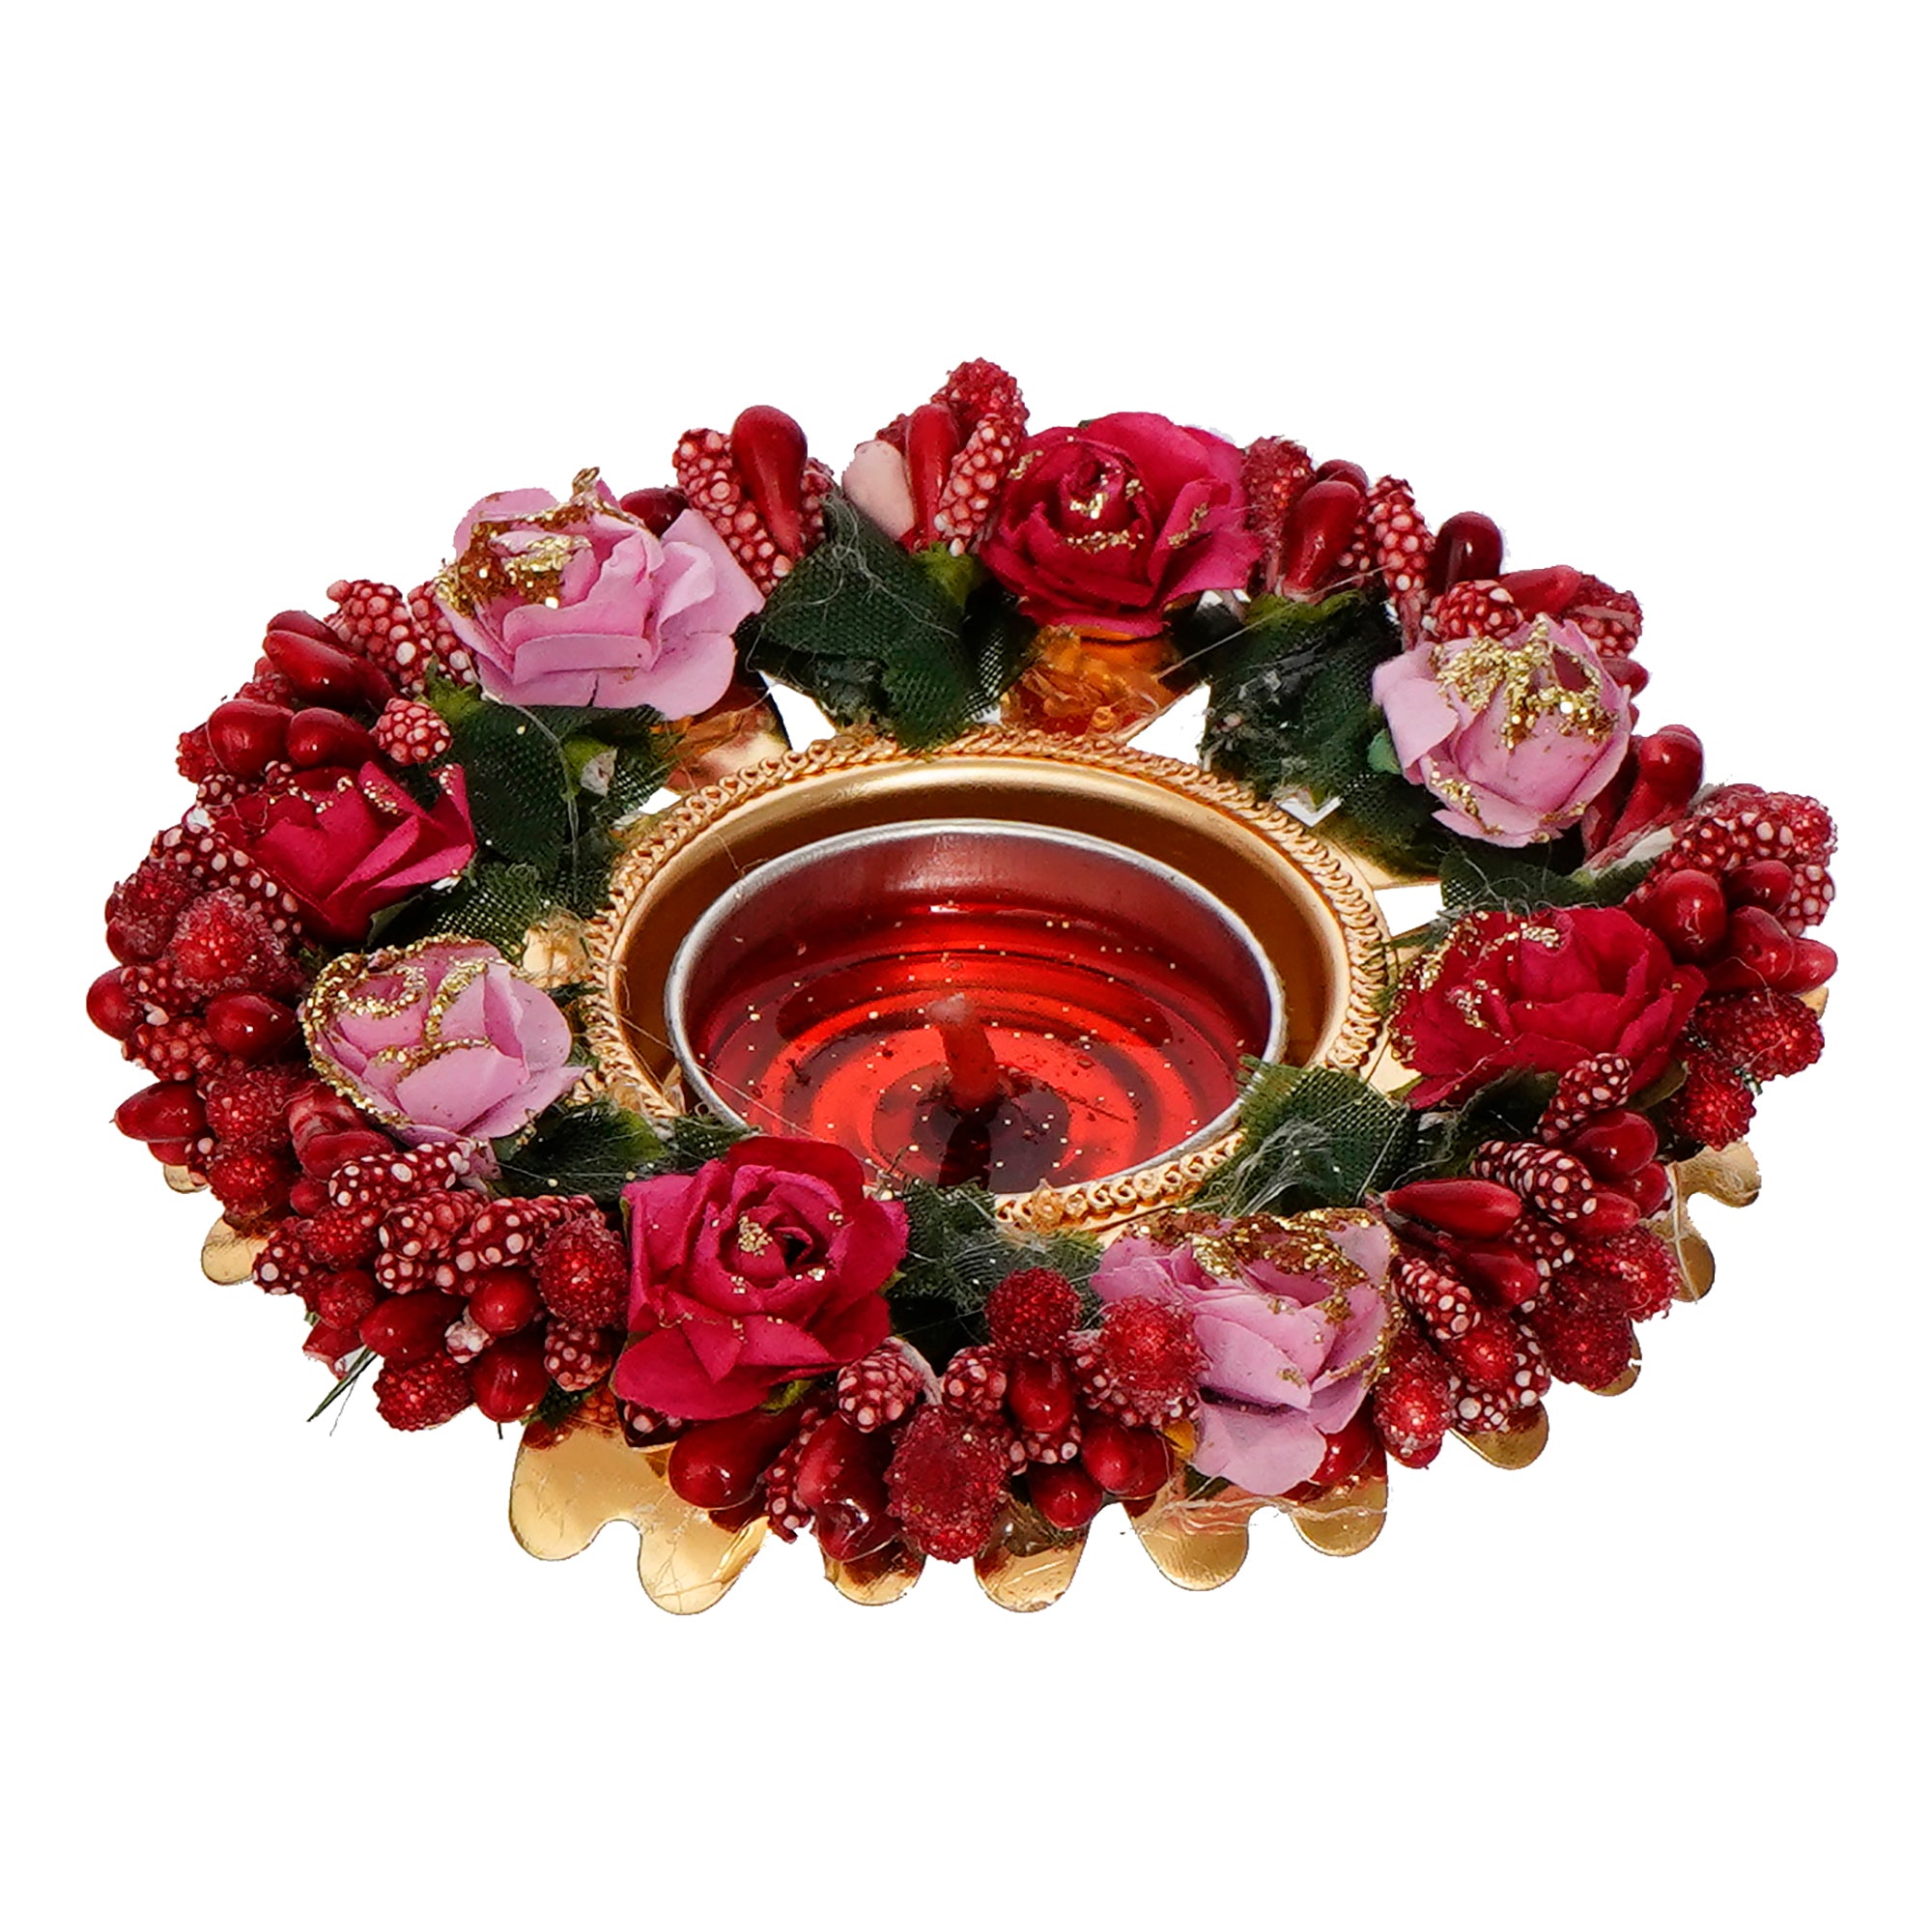 Decorative Handcrafted Red and Pink Floral Tea Light Holder 2